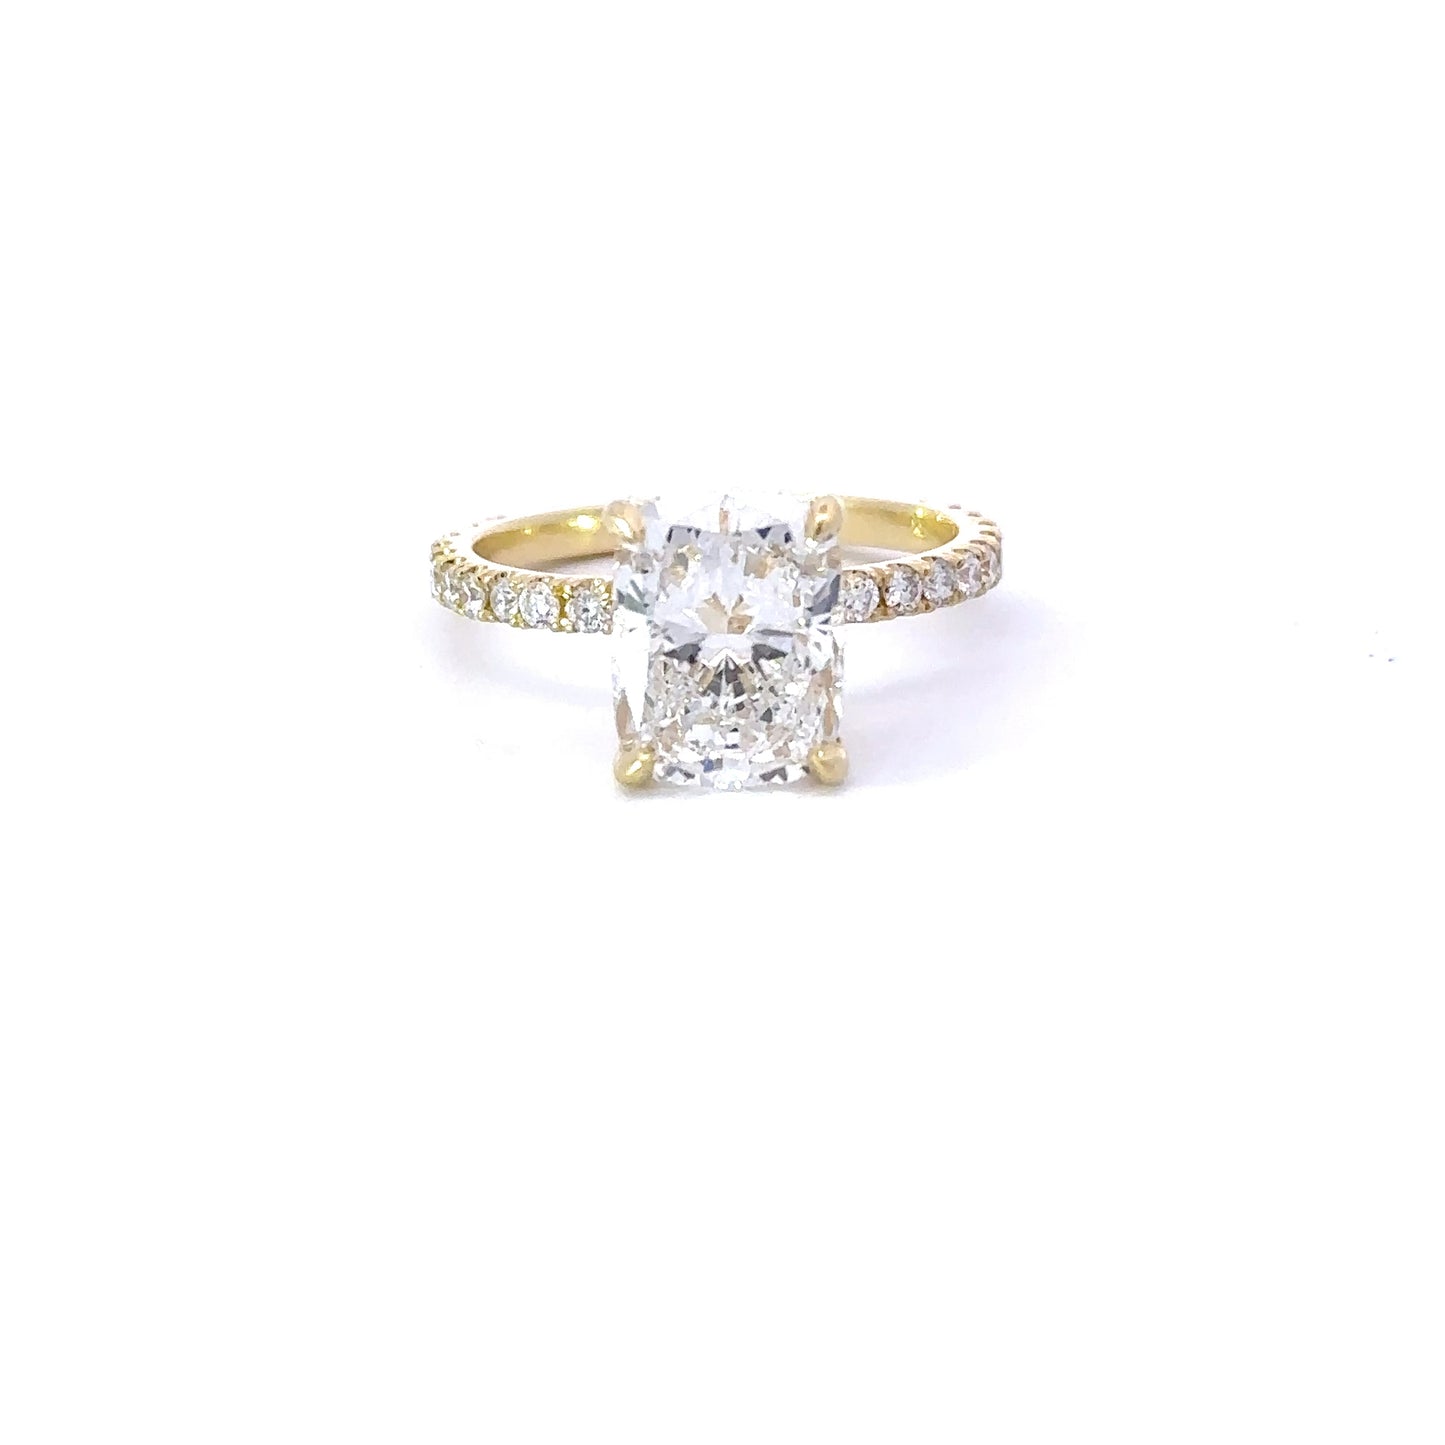 3.06 Carat Lab Grown Cushion Engagement Ring with Hidden Halo - Happy Jewelers Fine Jewelry Lifetime Warranty